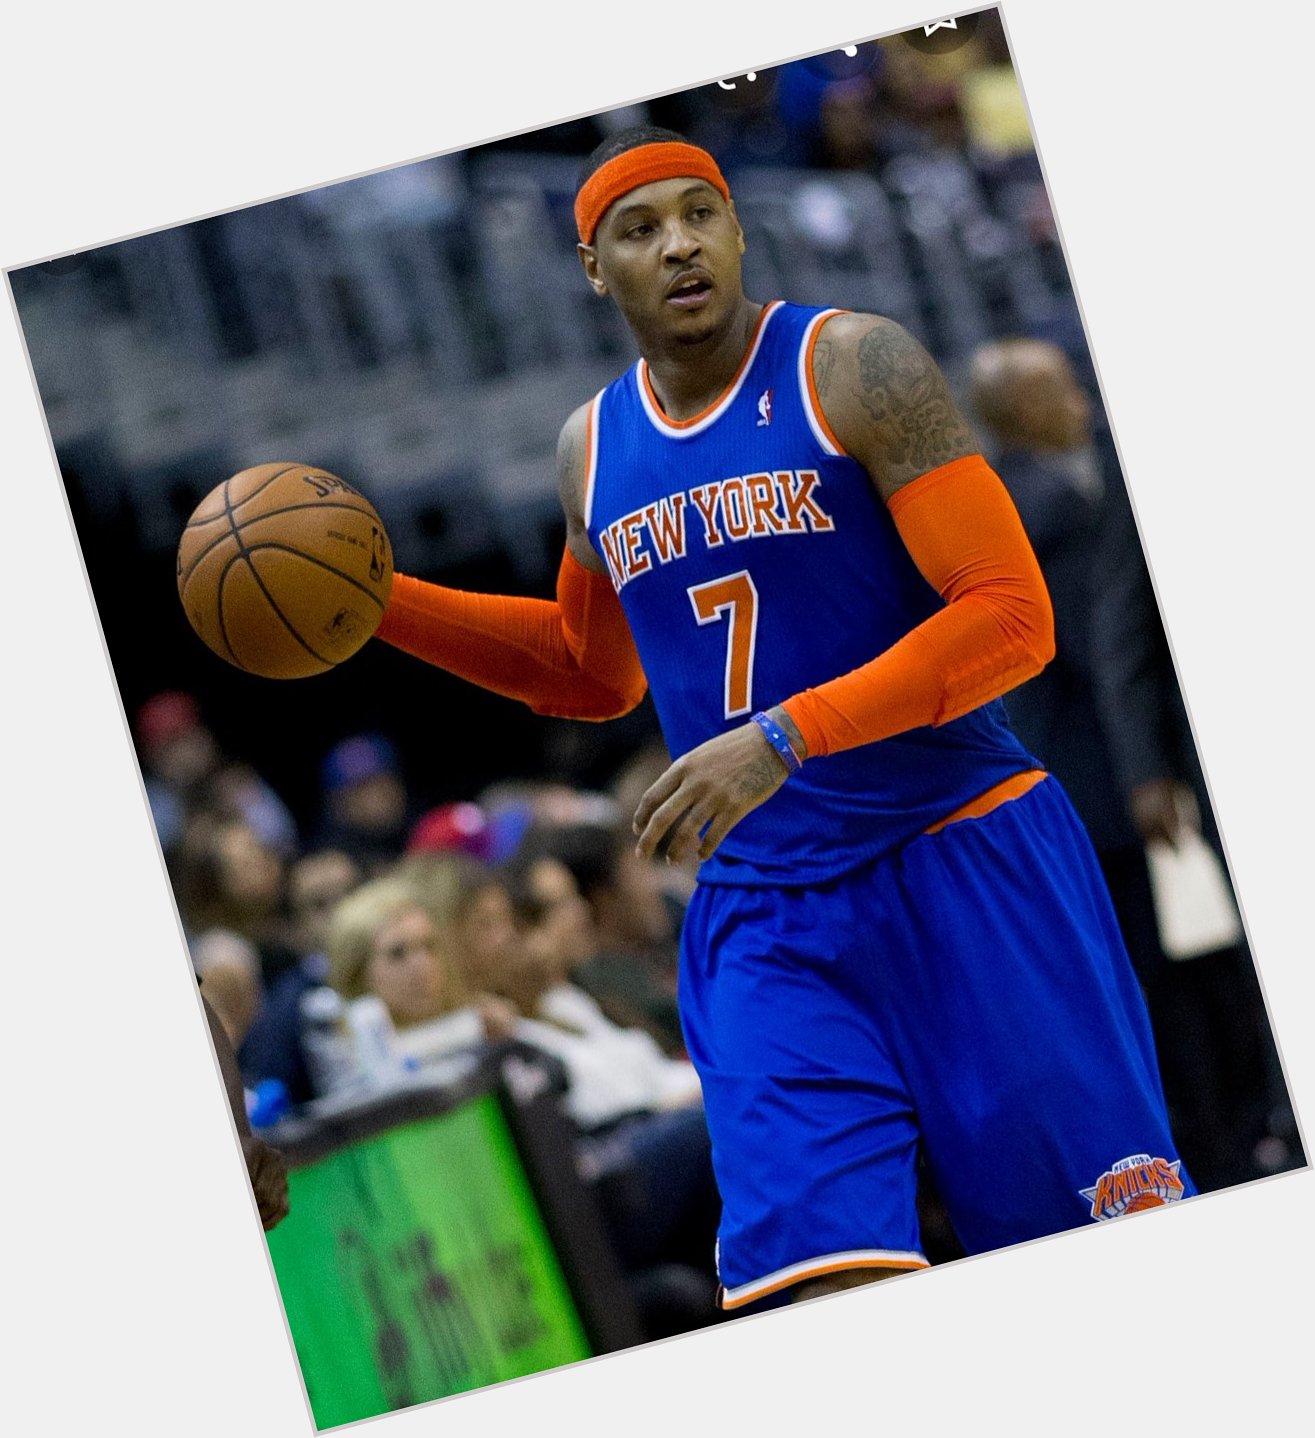 Carmelo Anthony Happy Birthday May 29 th 1984 37 years old 